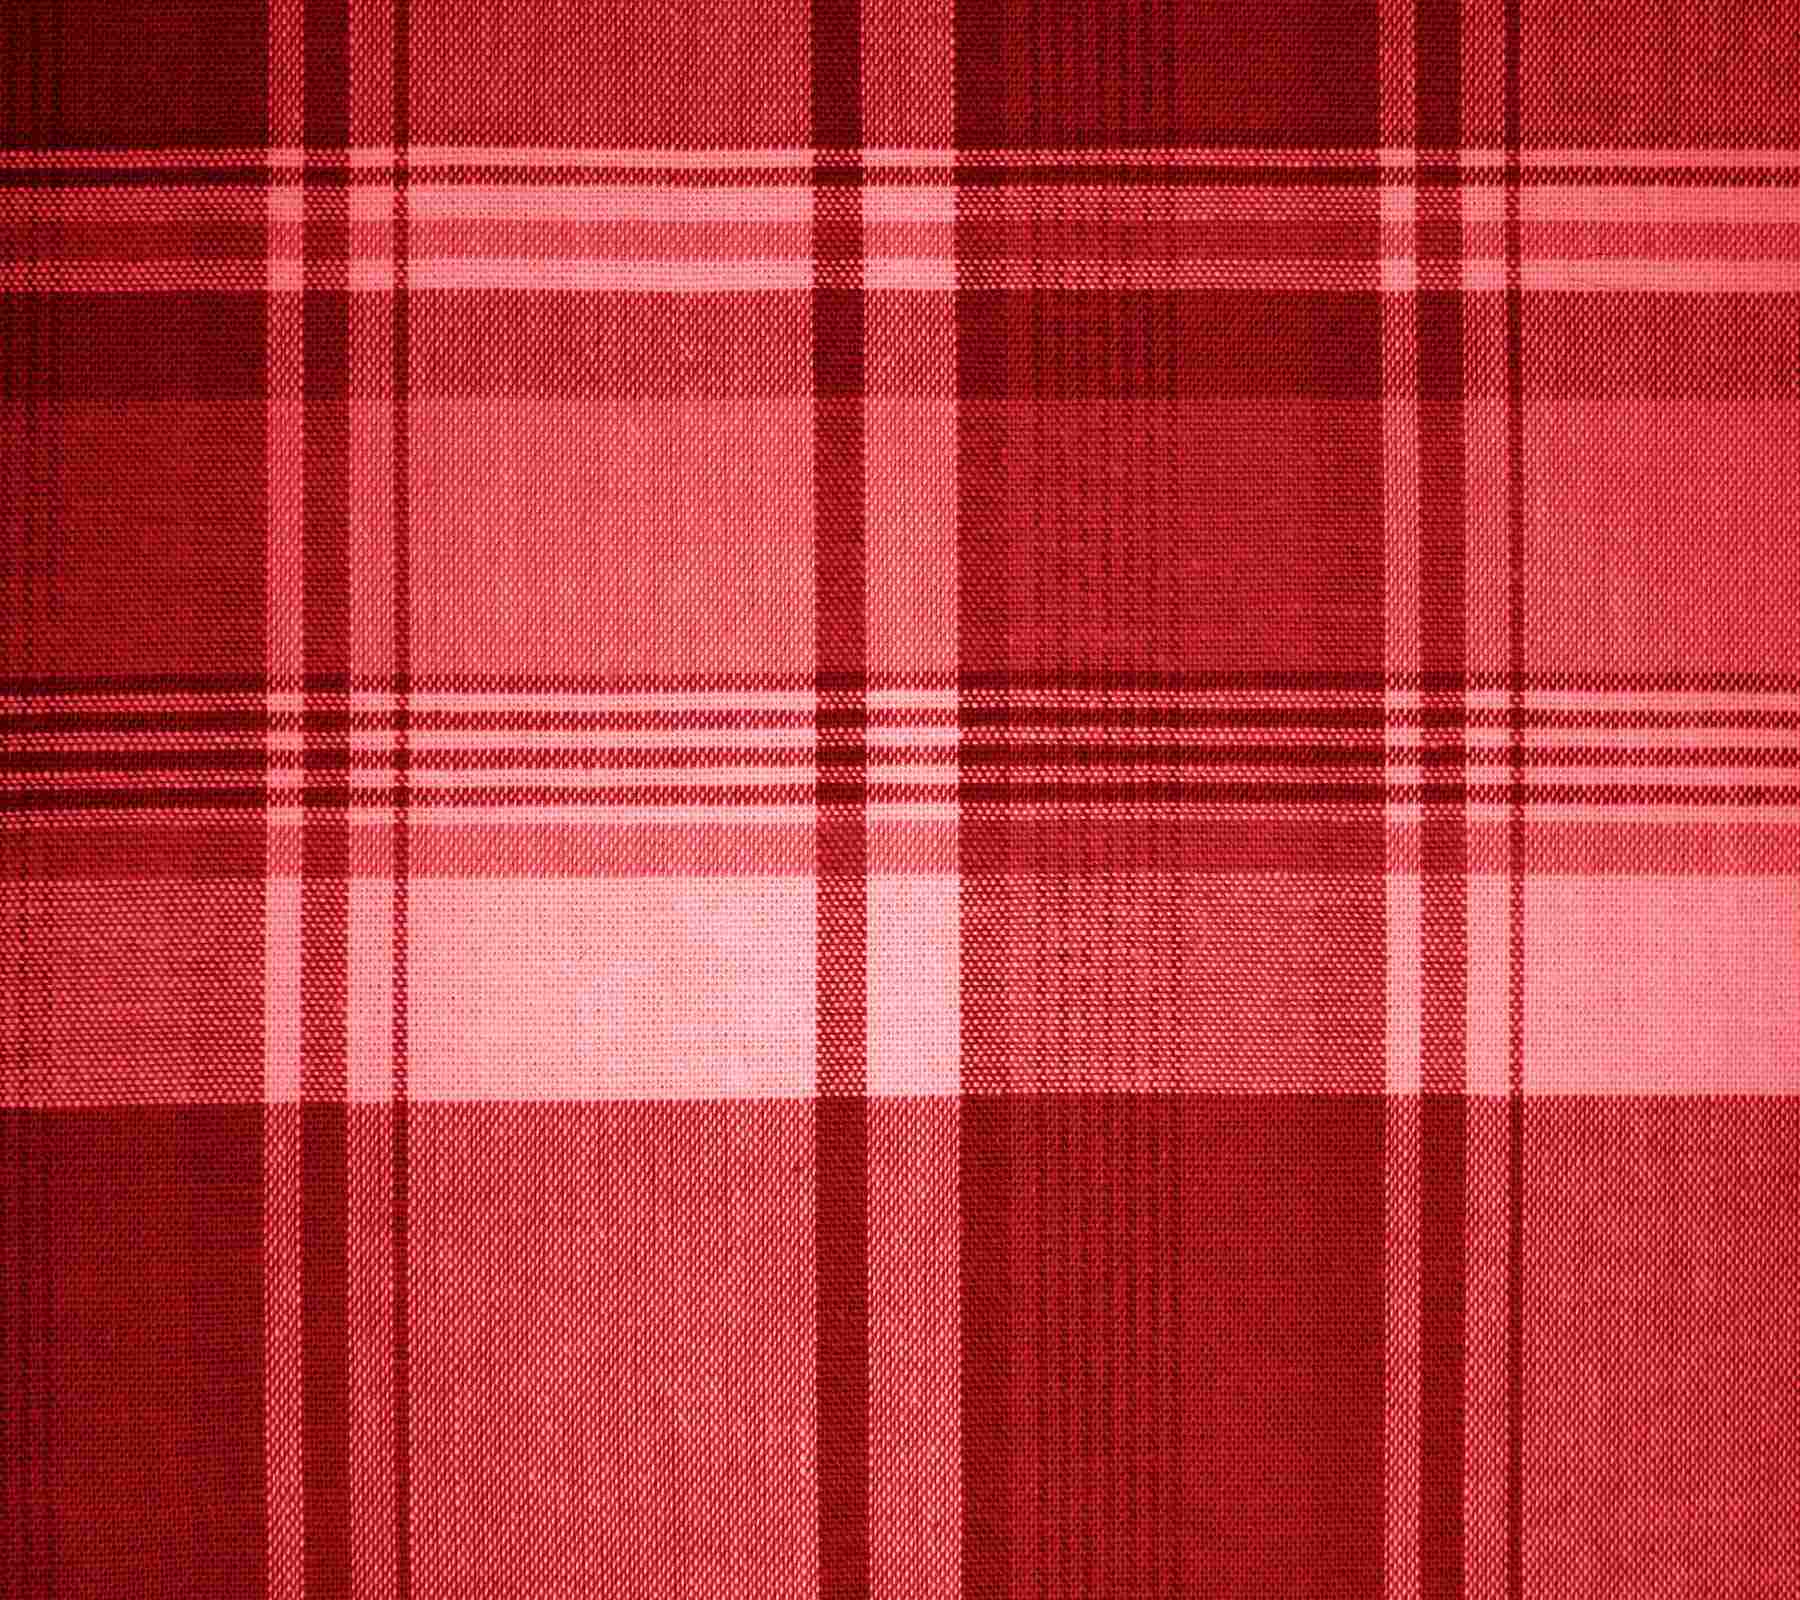 Red Plaid Fabric Background Image Wallpaper Or